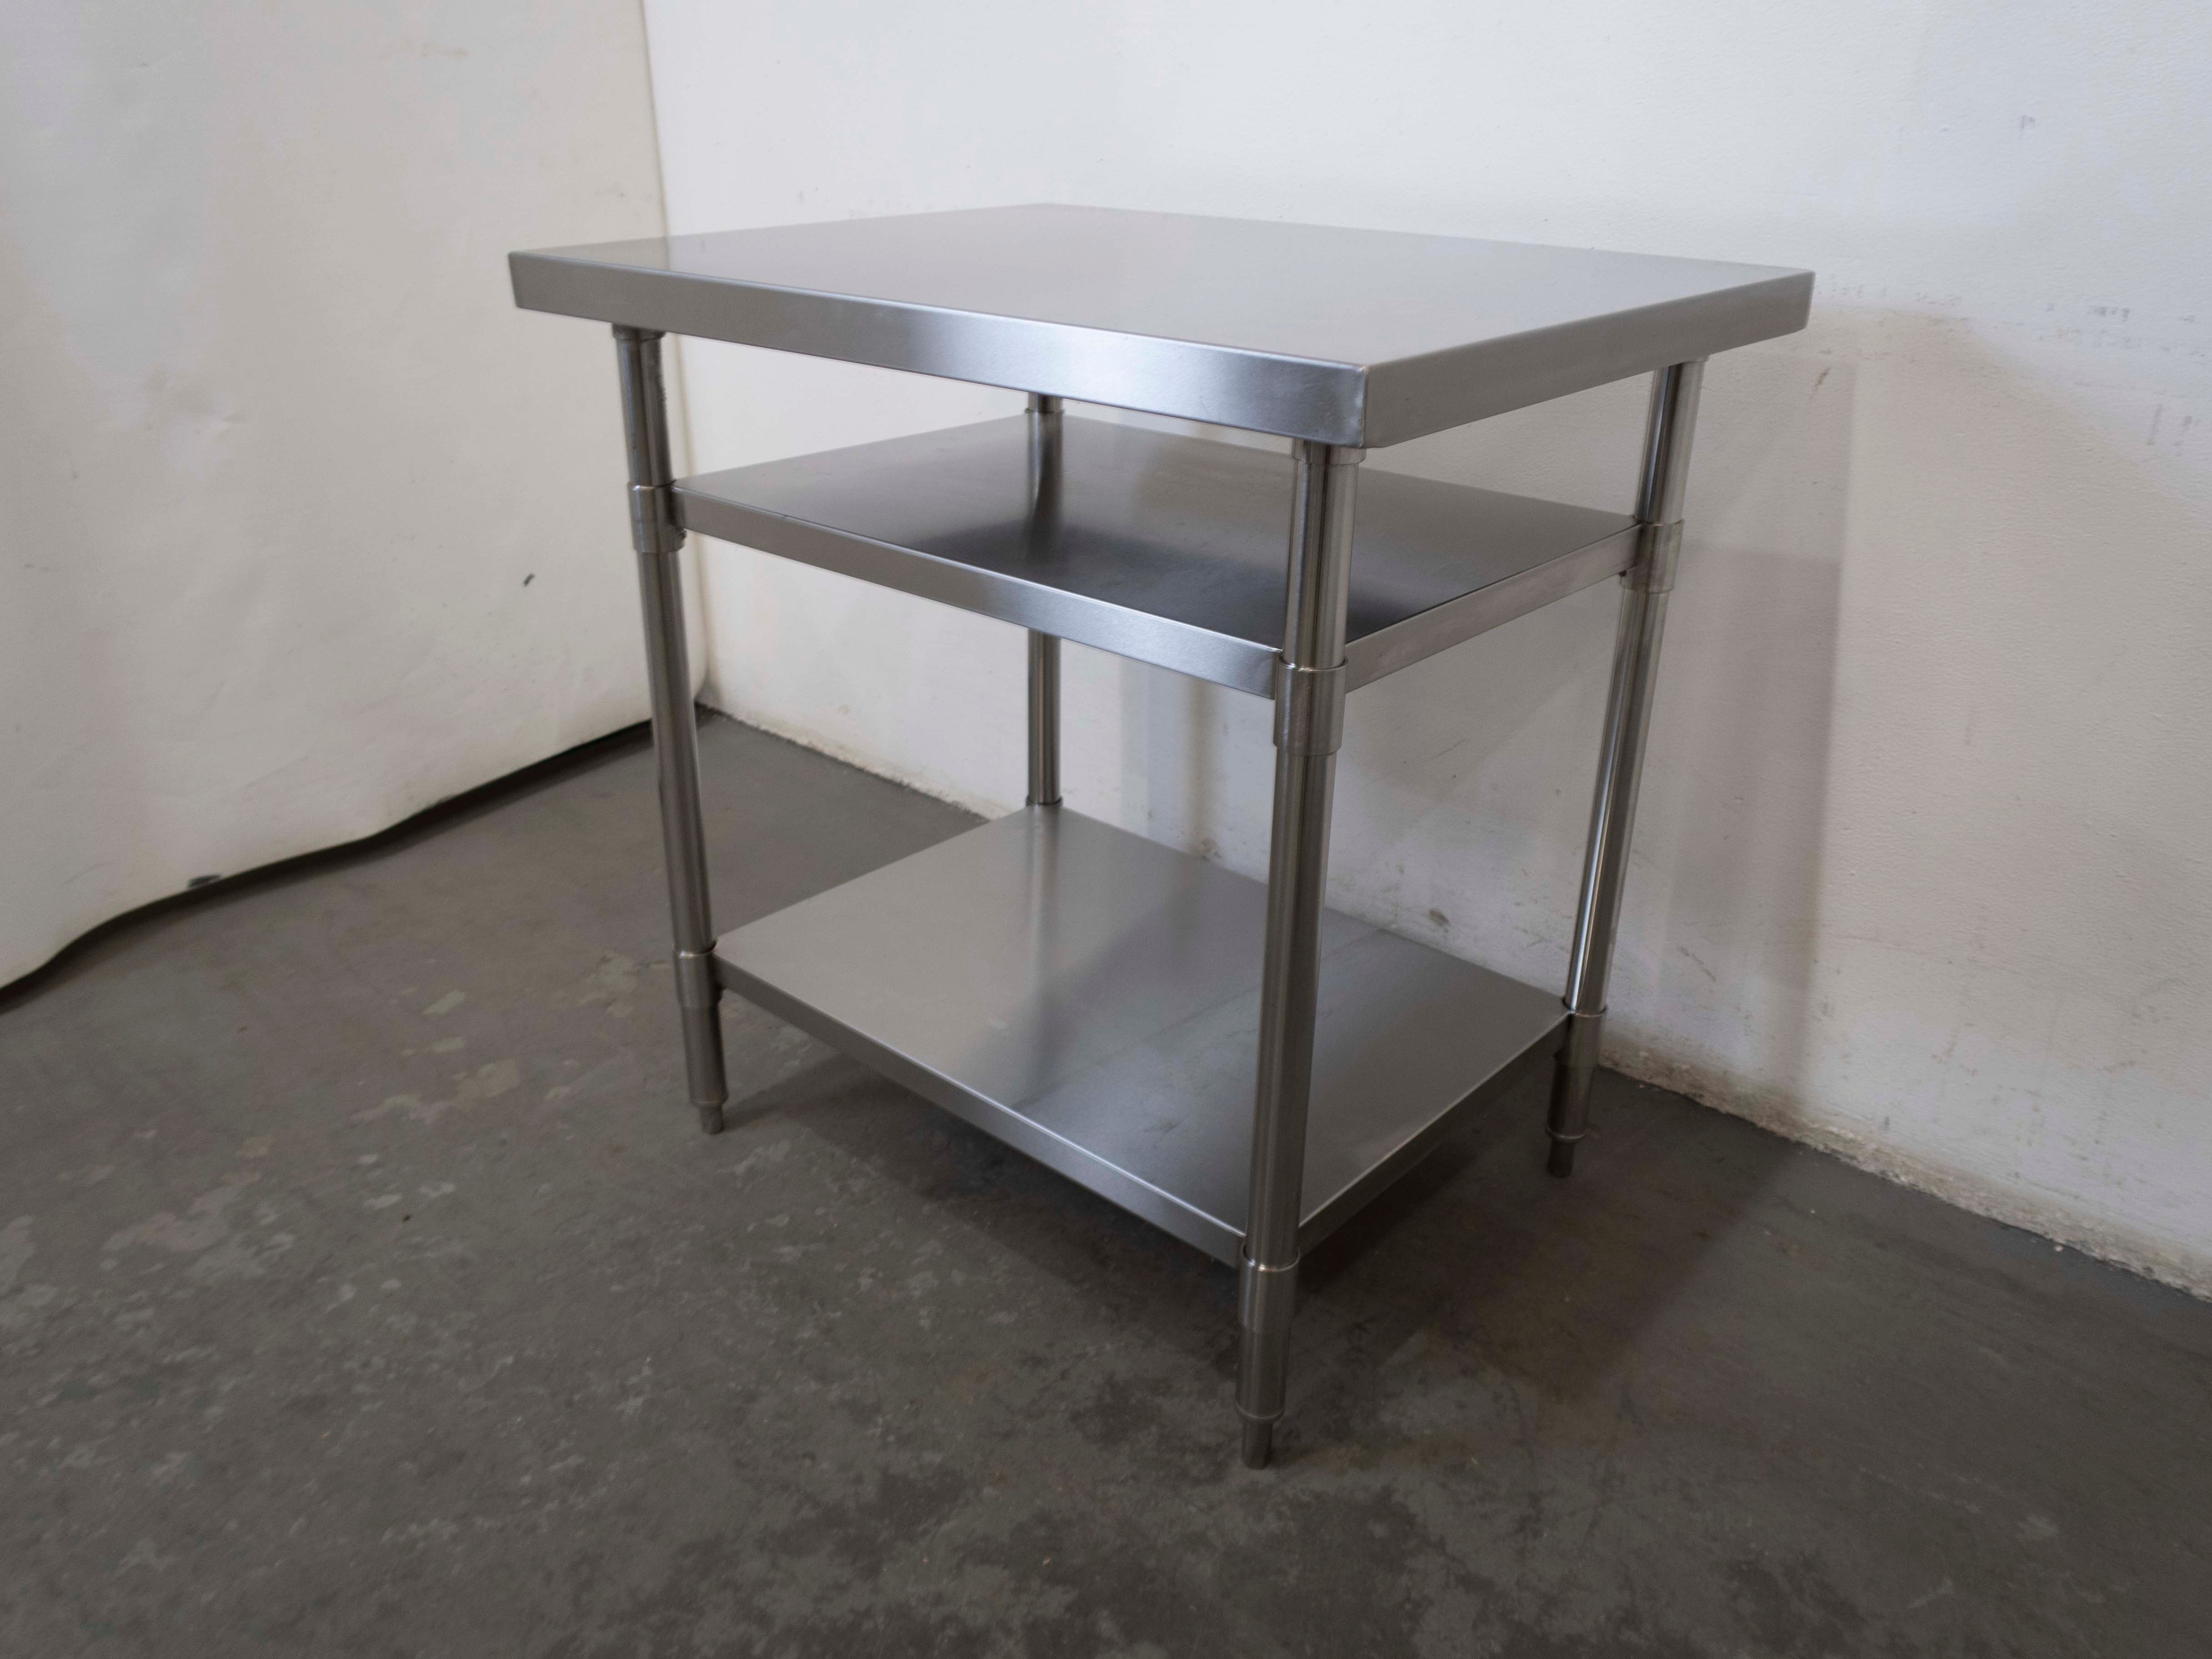 Thumbnail - Stainless Steel Work Table Bench with Dual Under Shelf